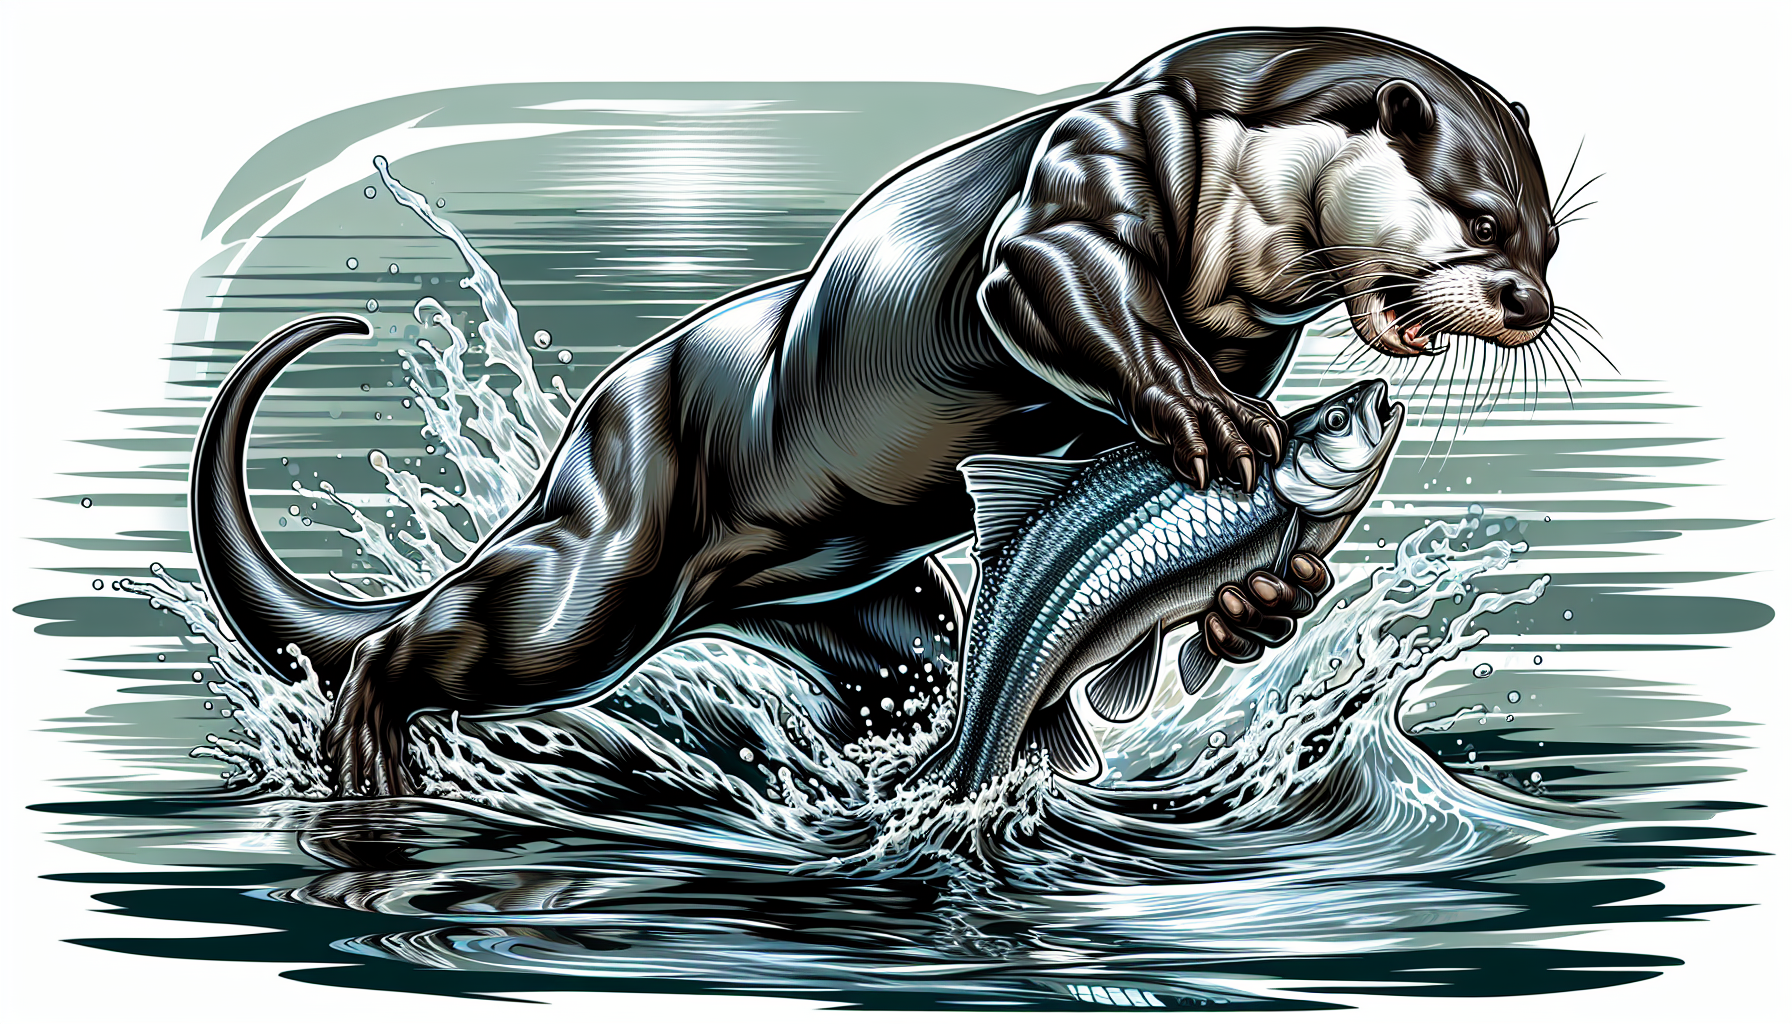 Illustration of a giant river otter catching a fish